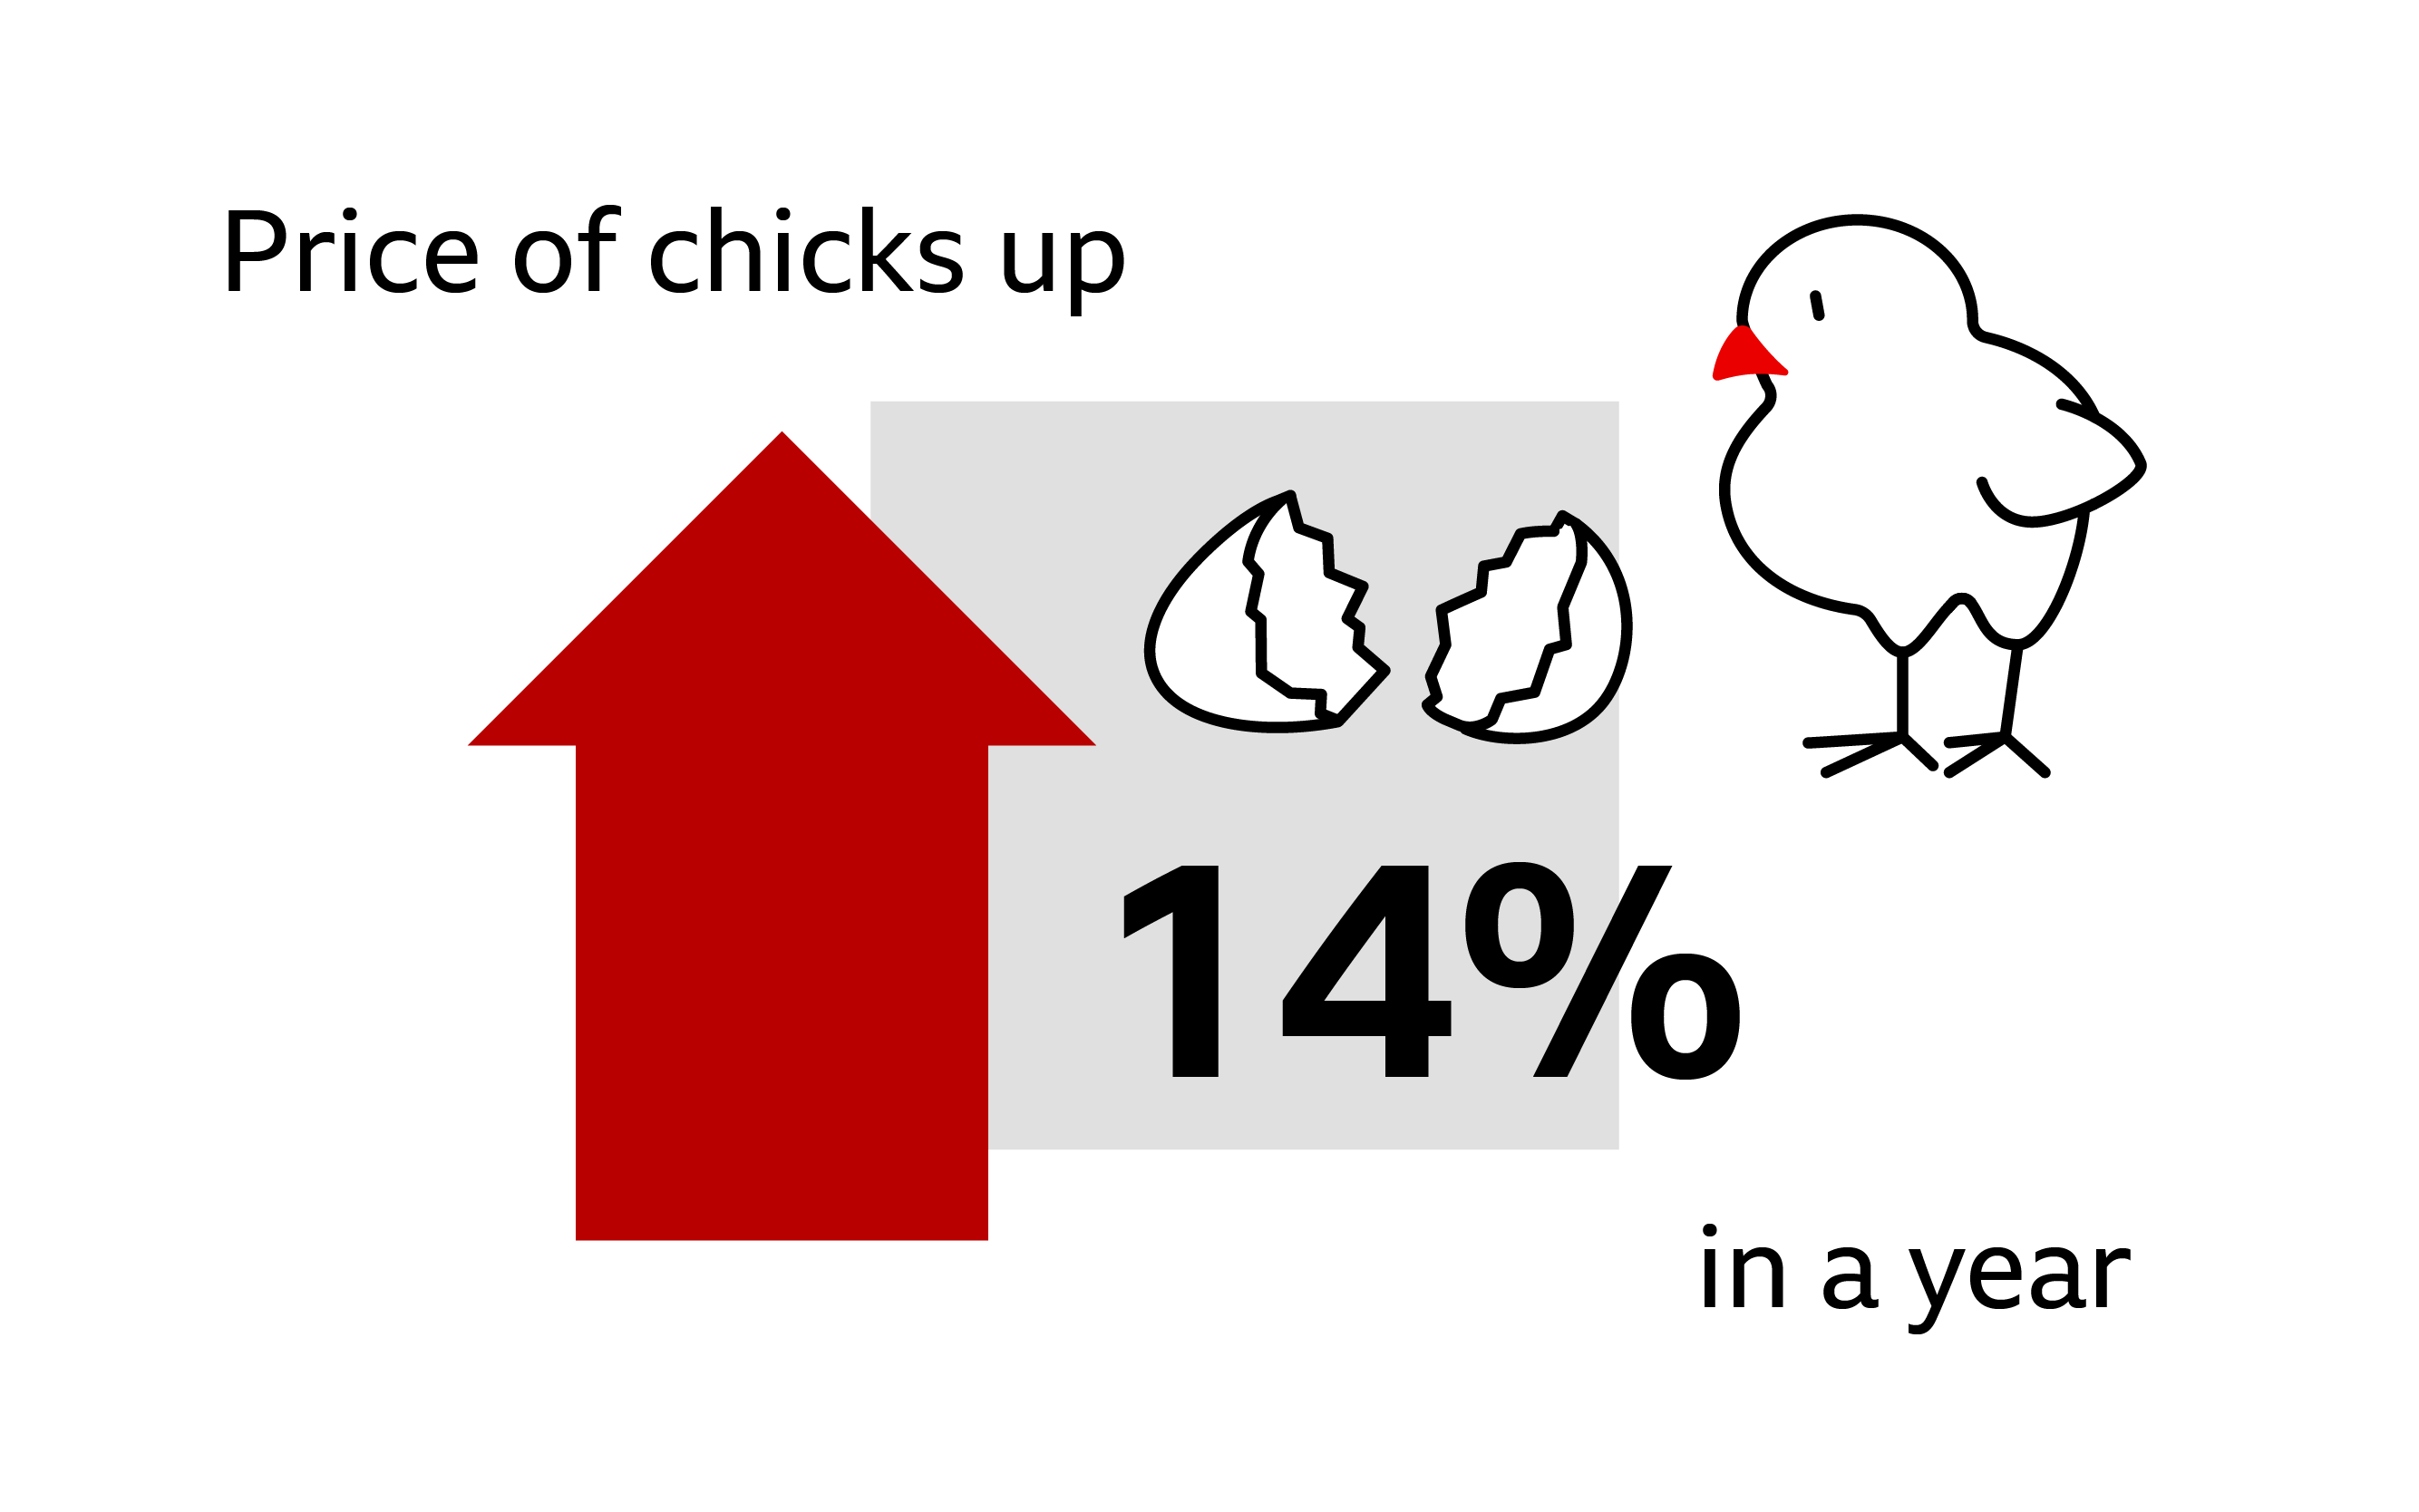 Key stat: Price of chicks up 14% in a year